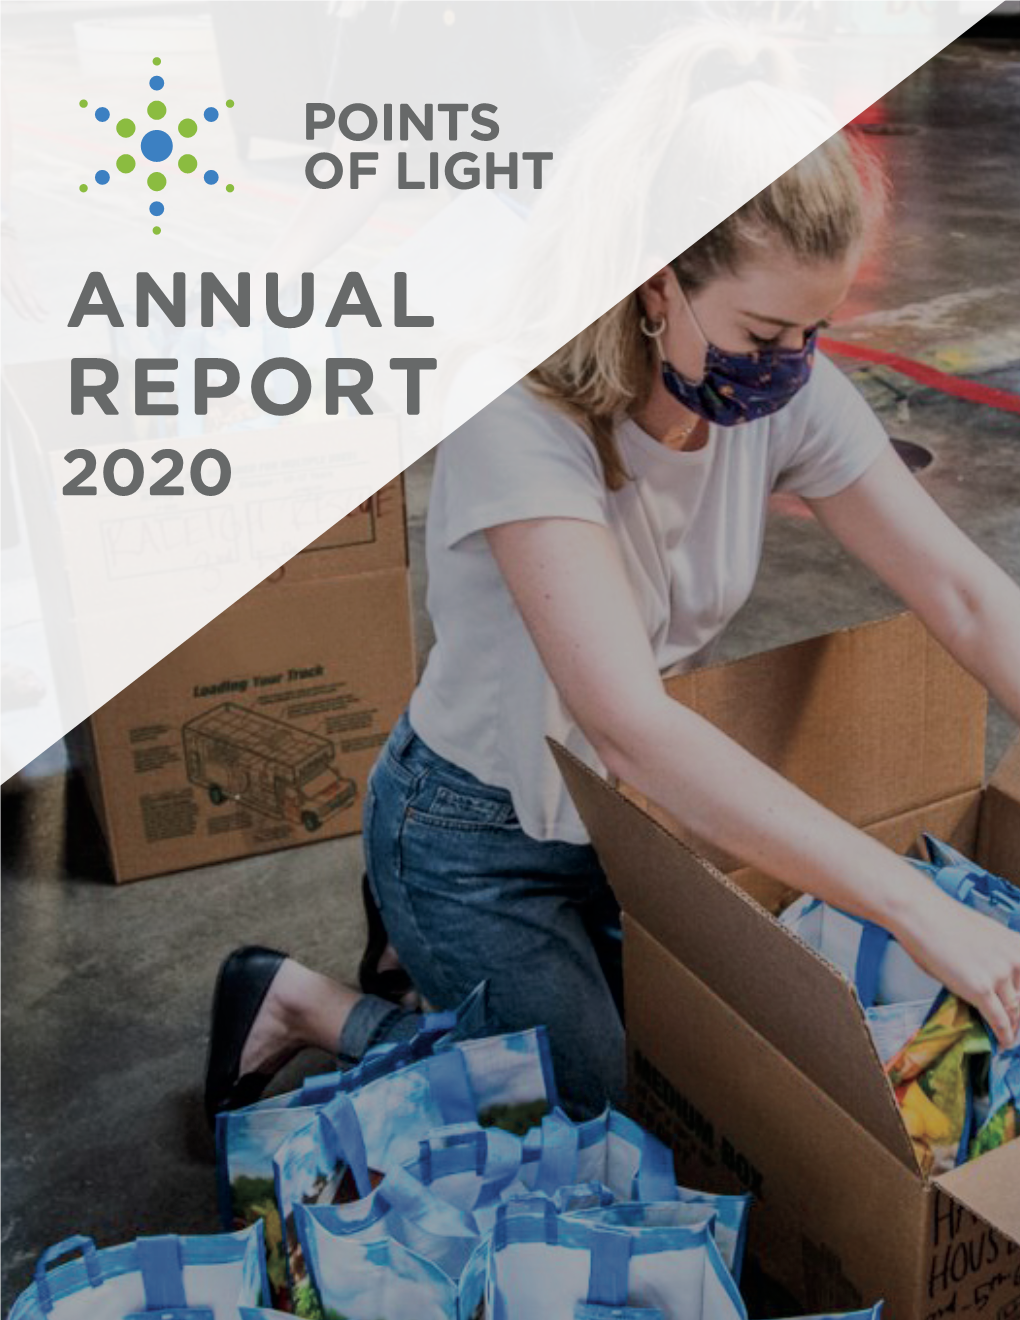 REPORT 2020 at POINTS of LIGHT, We Believe That the Most Powerful Force of Change in Our World Is the Individual — One Who Makes a Positive Difference